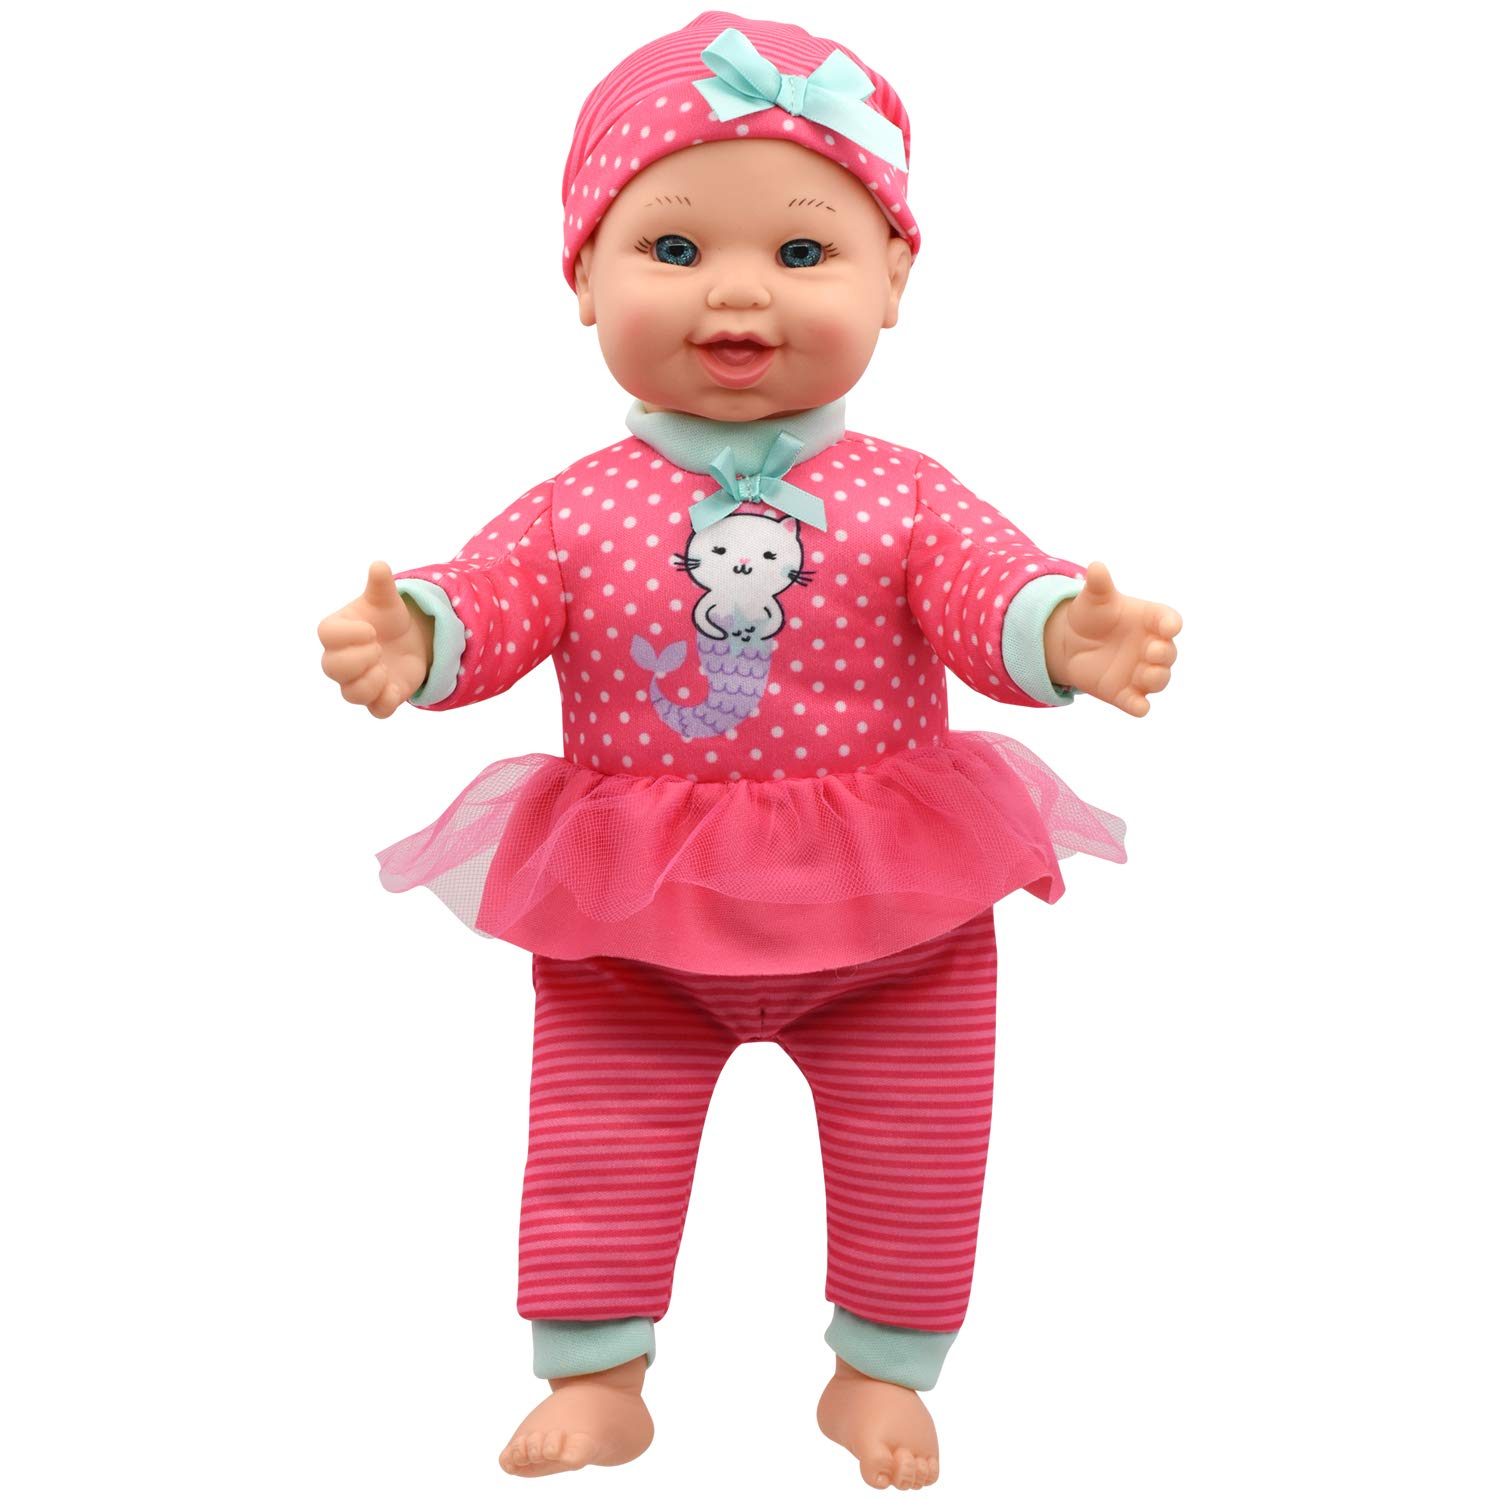 Little Darling Talking Baby (3114), 12” Soft body baby doll, 6 different baby sounds. Age 1+